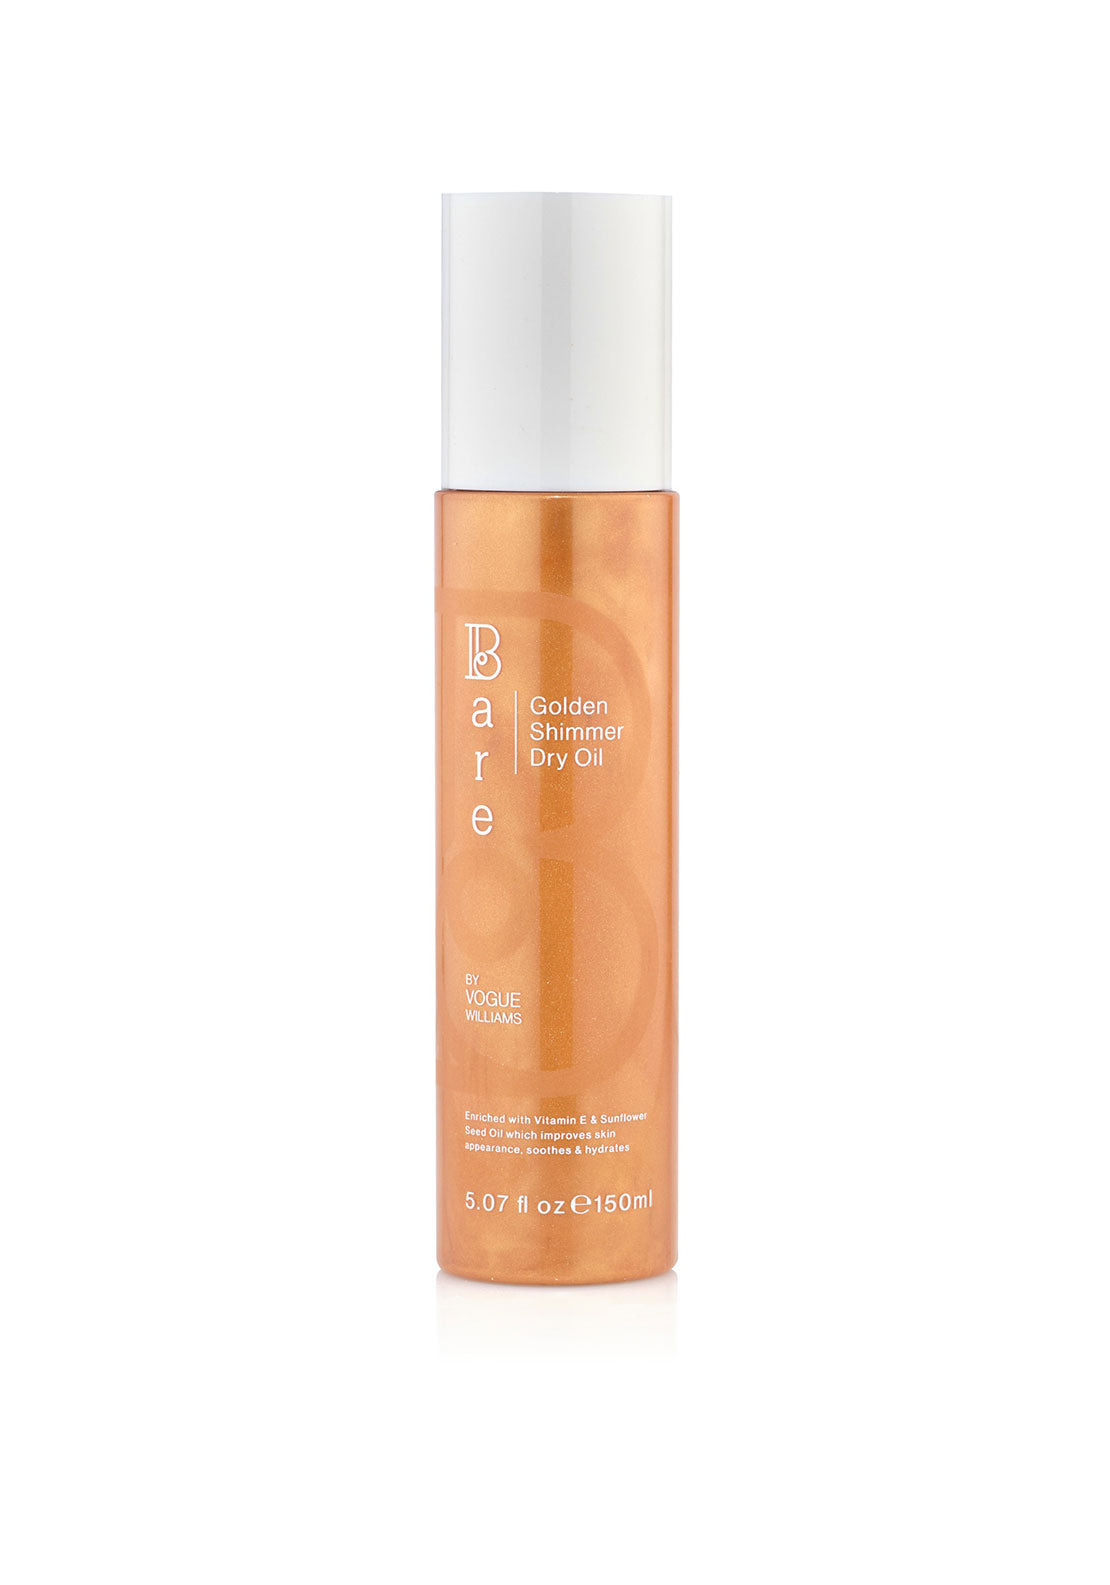 Bare By Vogue Golden Shimmer Dry Oil 1 Shaws Department Stores